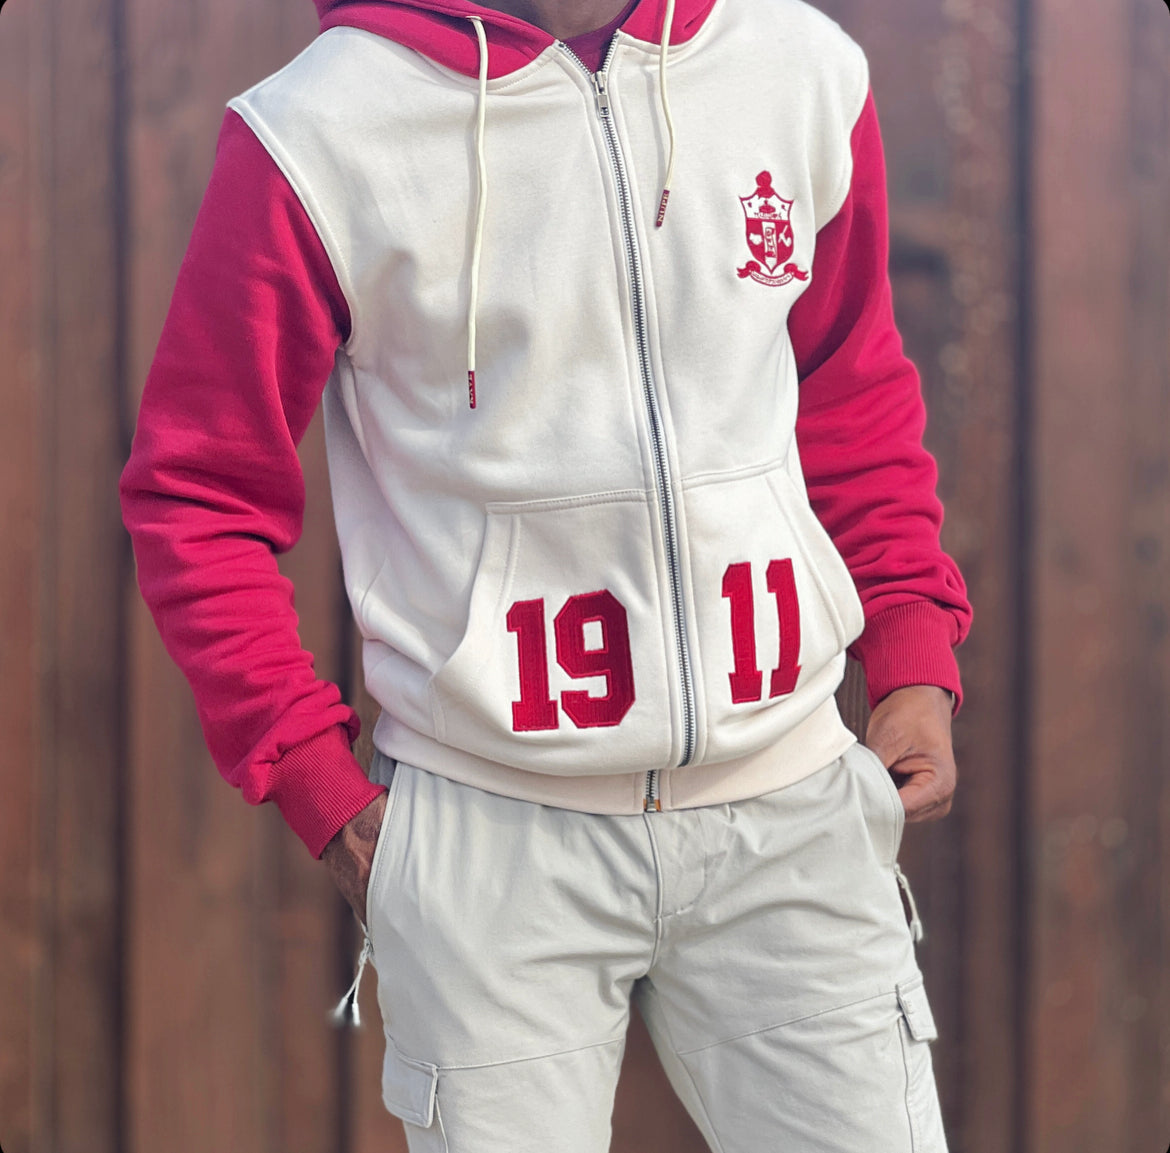 Whether you're attending a Kappa alpha psi event or just want to show off your fraternity pride, this hoodie is the perfect addition to your wardrobe. Don't miss out on the chance to own a piece of Kappa alpha psi history. Order now and show off your fraternity pride in style!